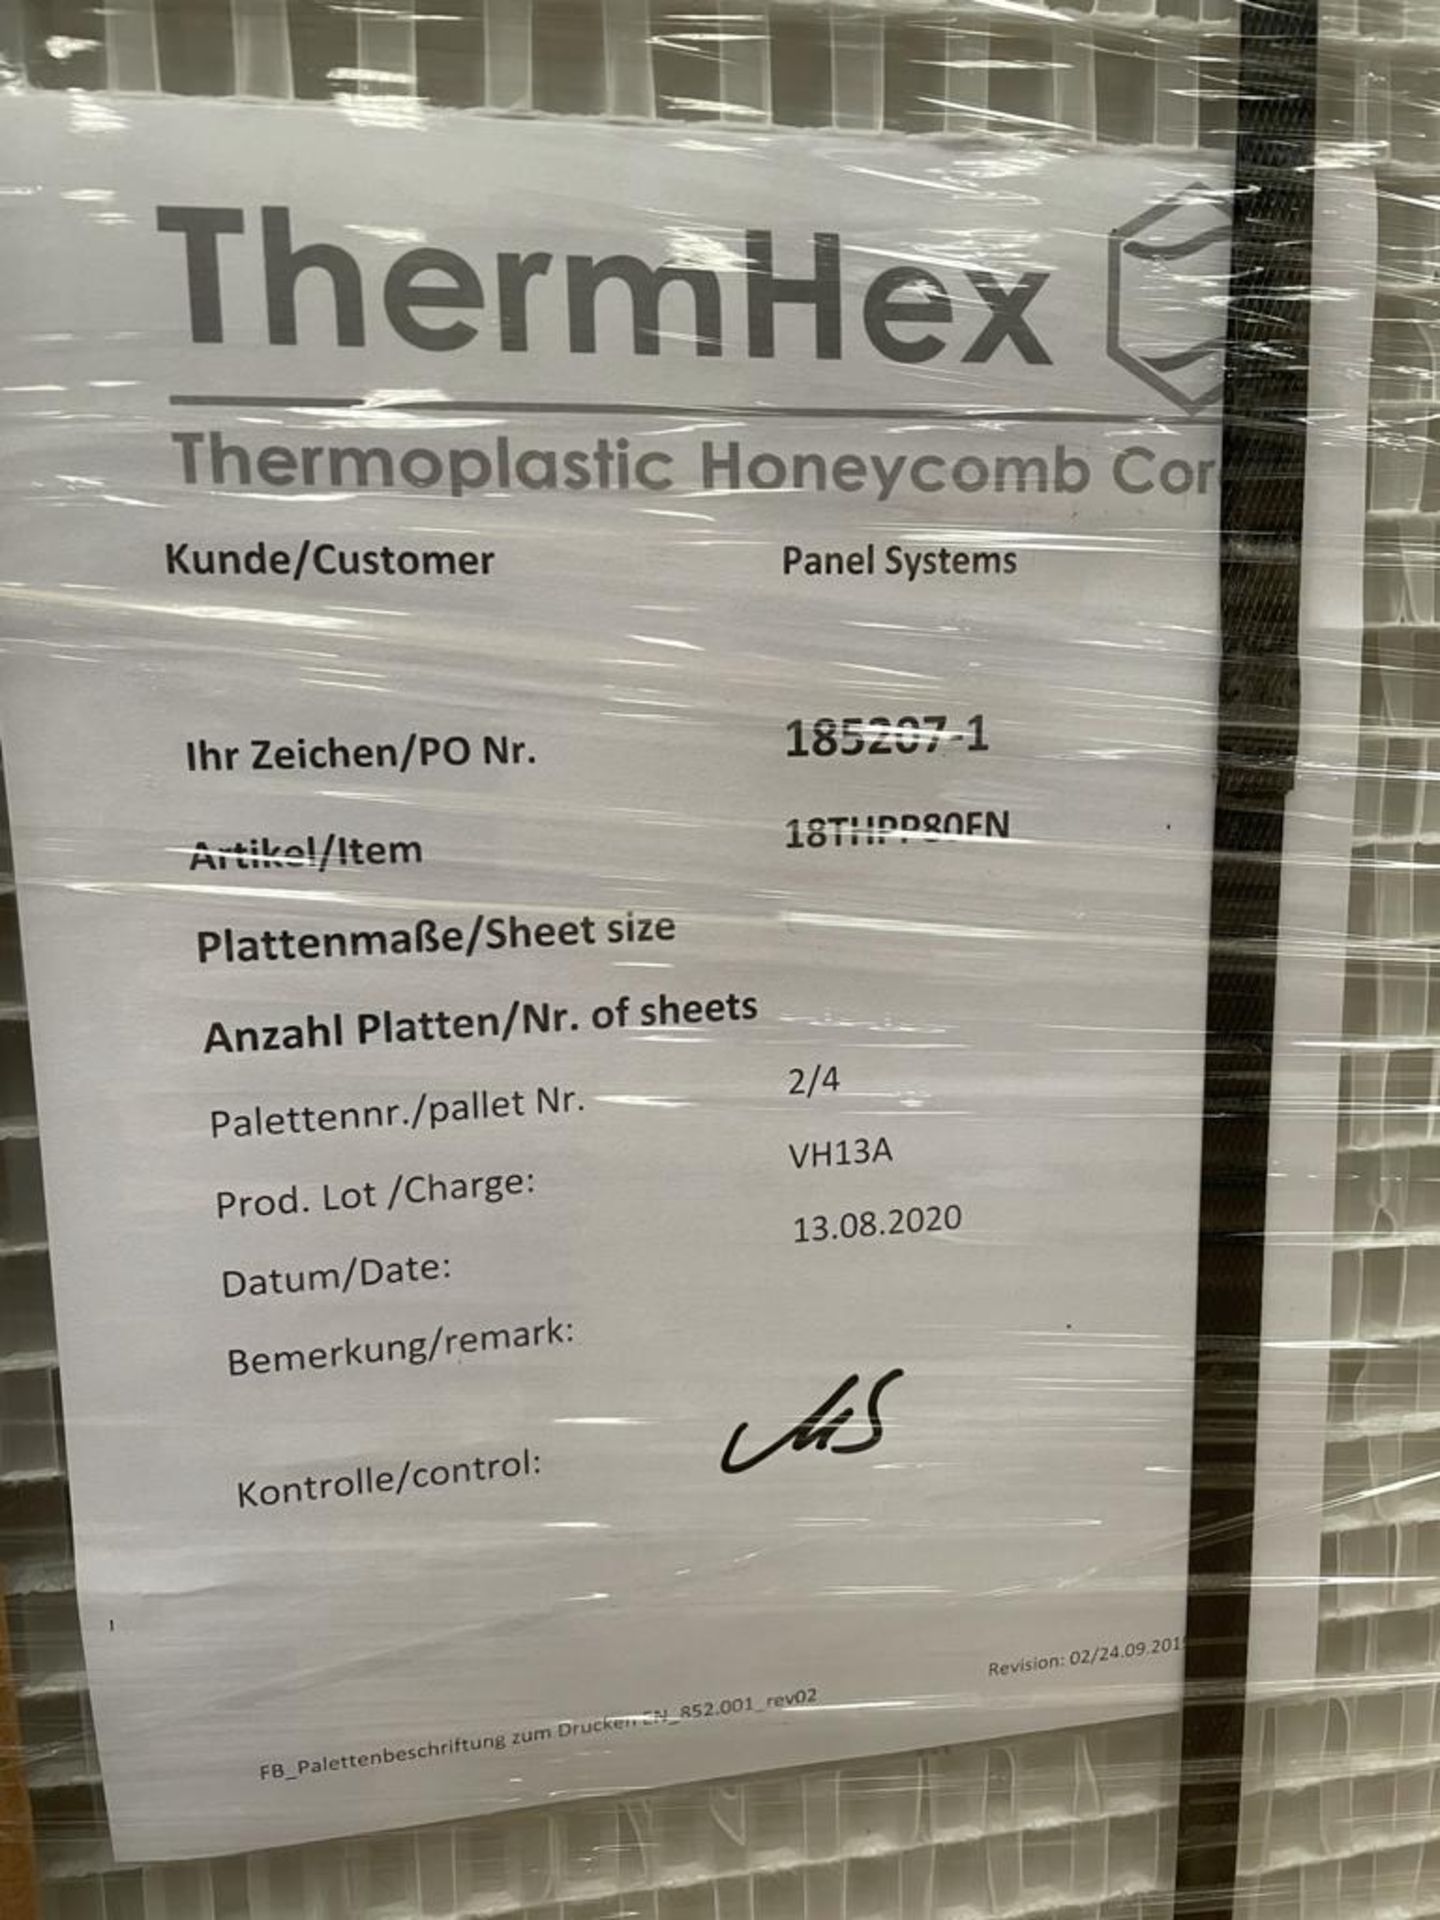 6 x ThermHex Thermoplastic Honeycomb Core Panels - Size 693 x 1210 x 18mm - New Stock - - Image 2 of 8